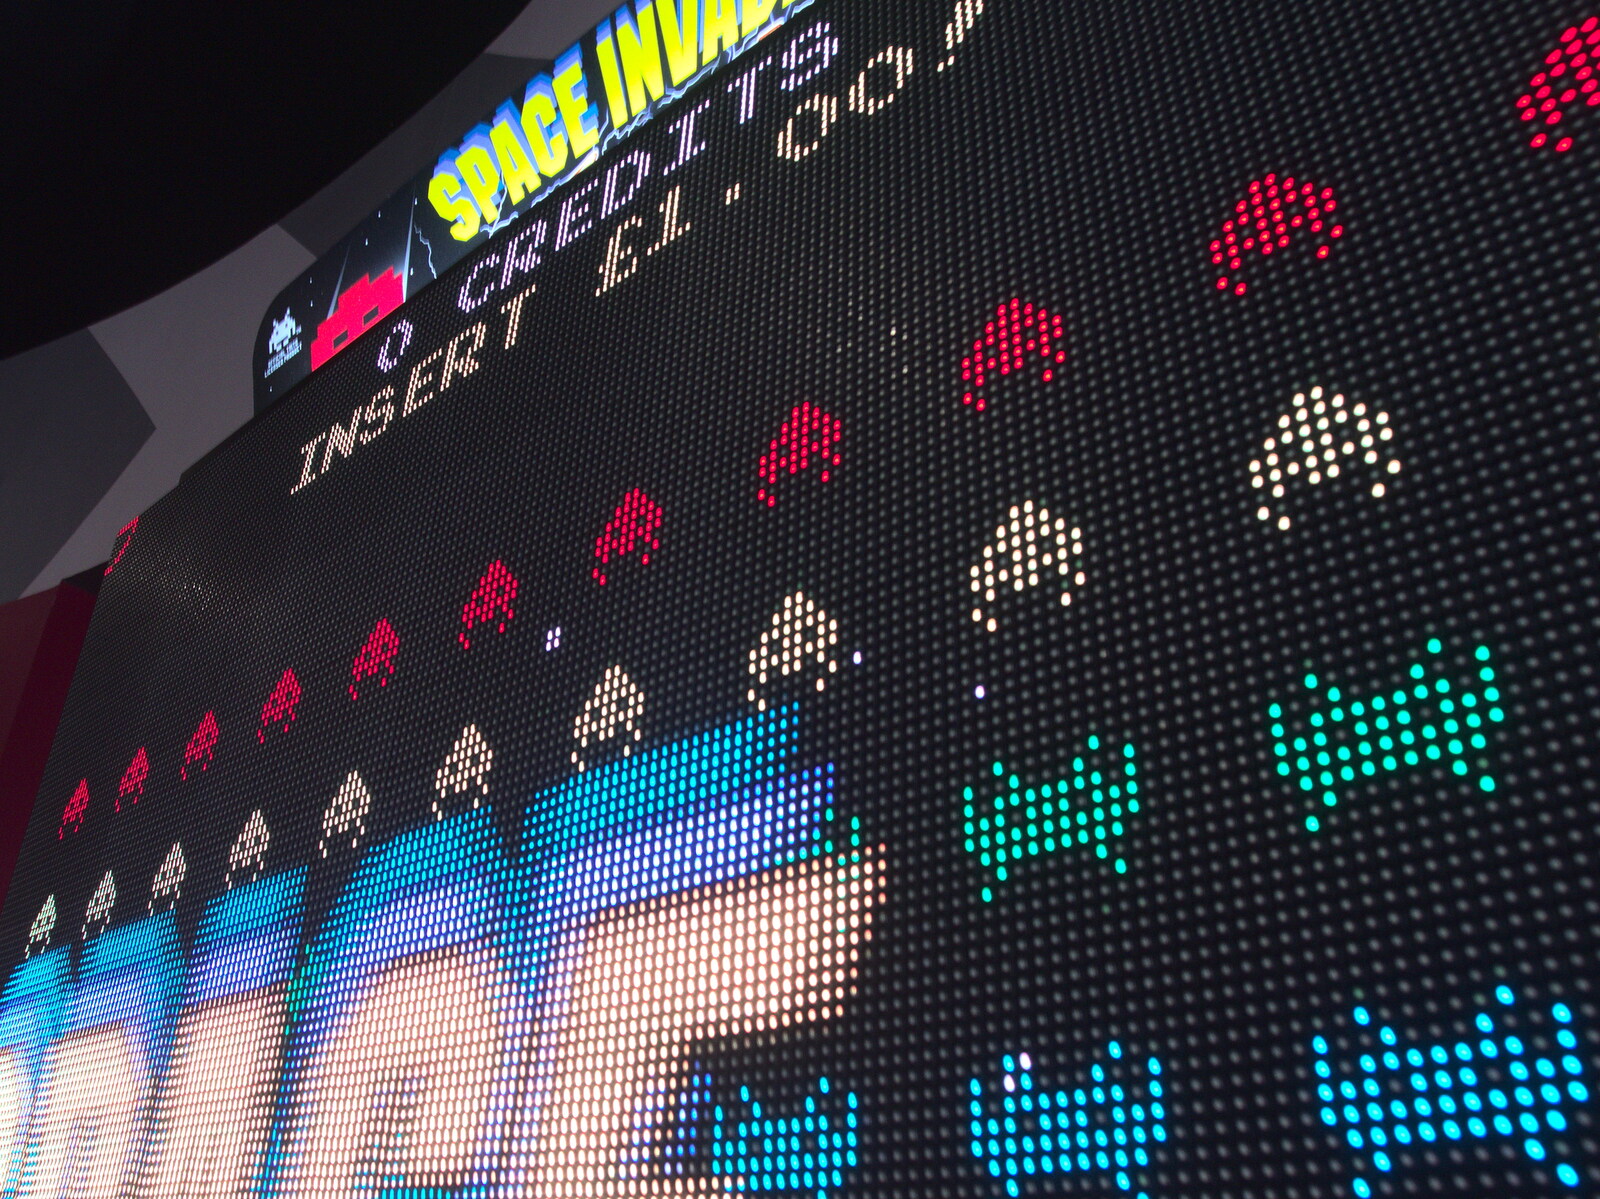 Space Invaders on a big LED-pixel screen from A Trip to the Cinema, Norwich, Norfolk - 3rd December 2017